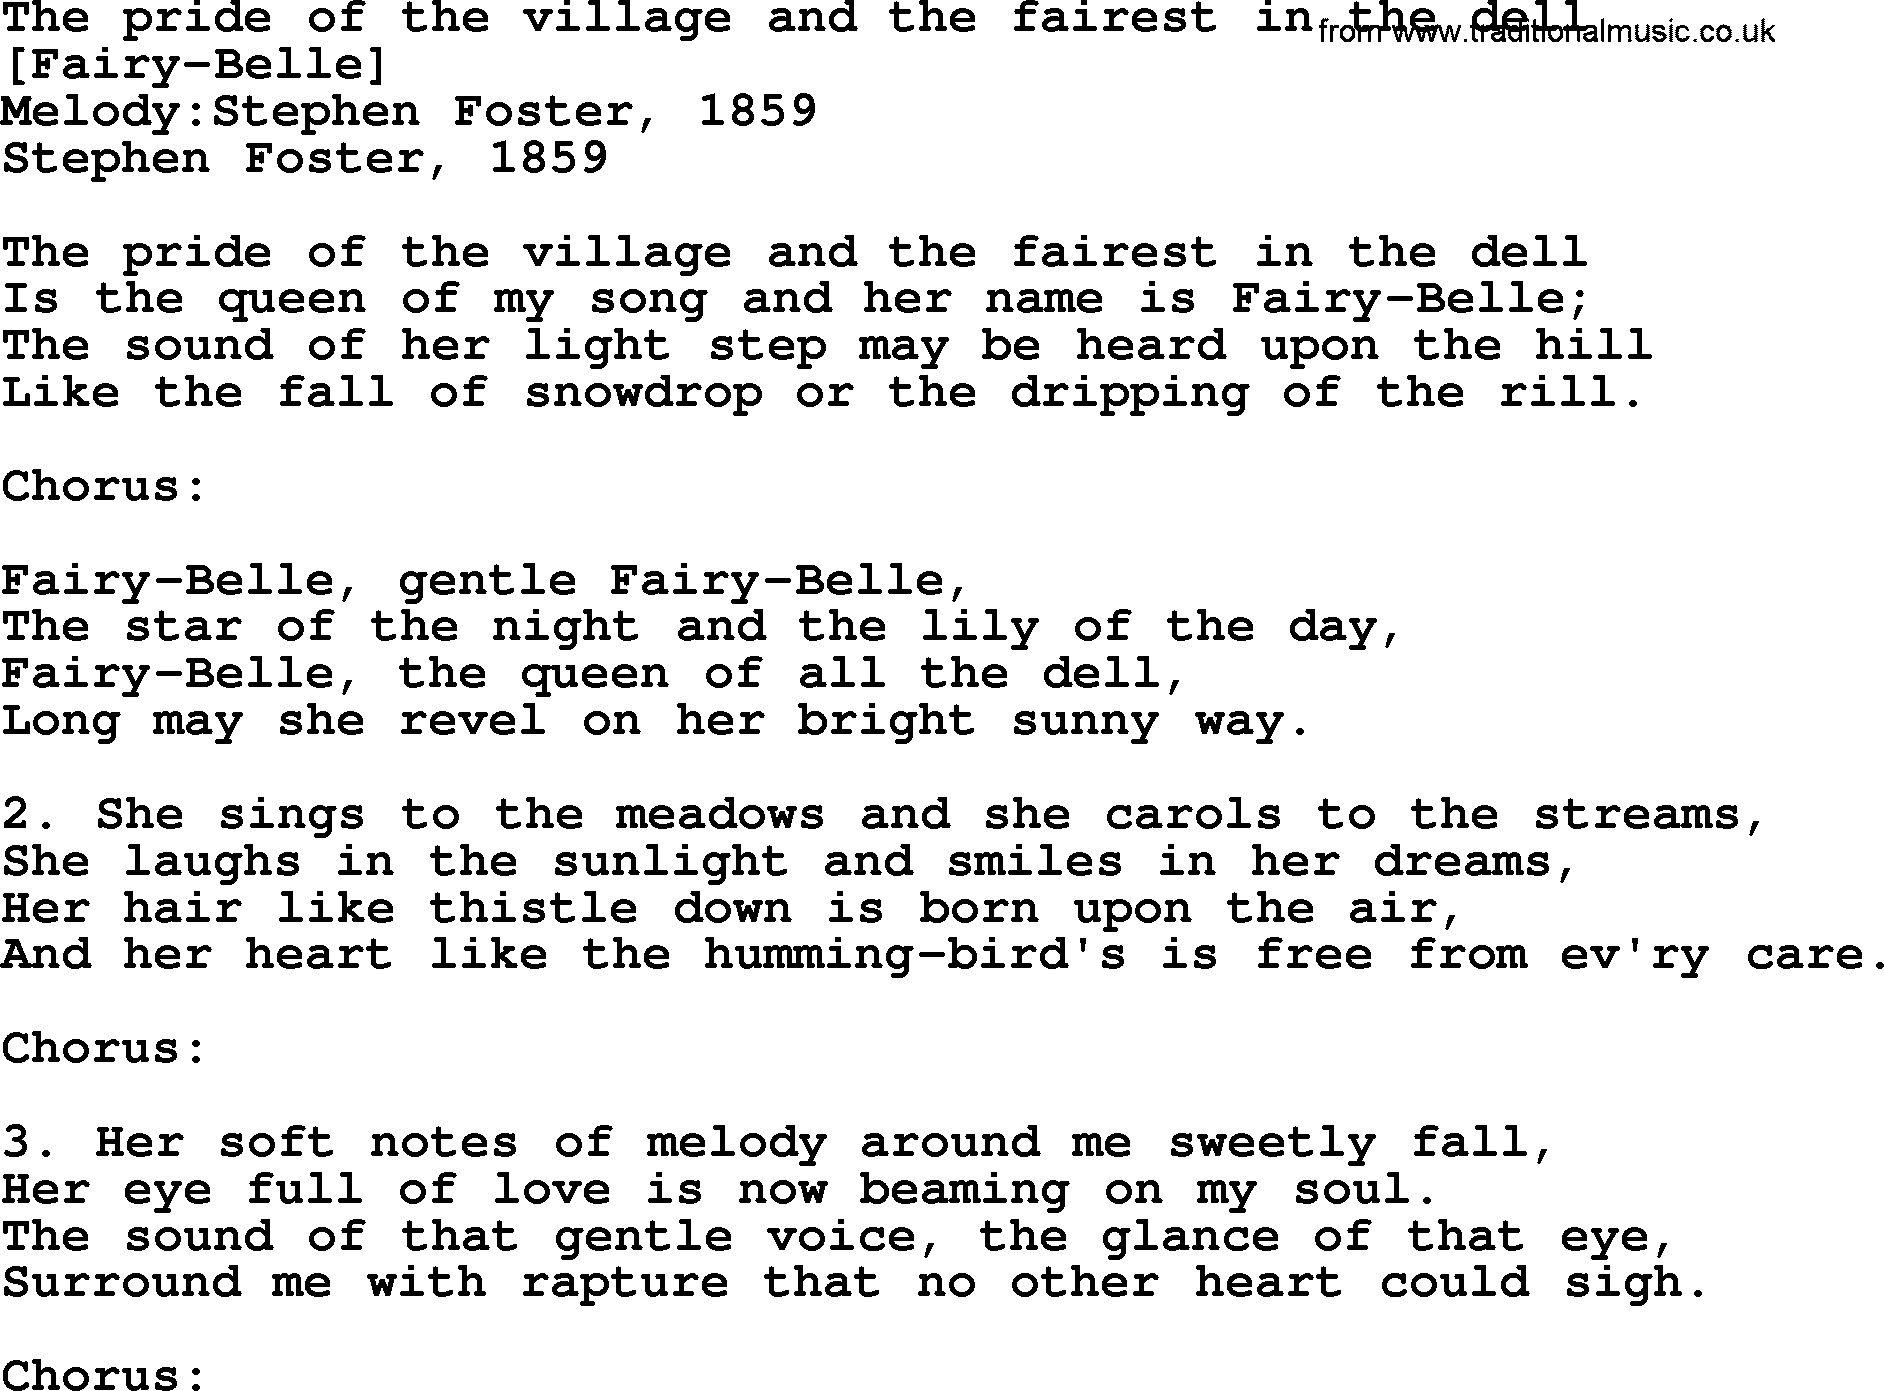 Old American Song: The Pride Of The Village And The Fairest In The Dell, lyrics